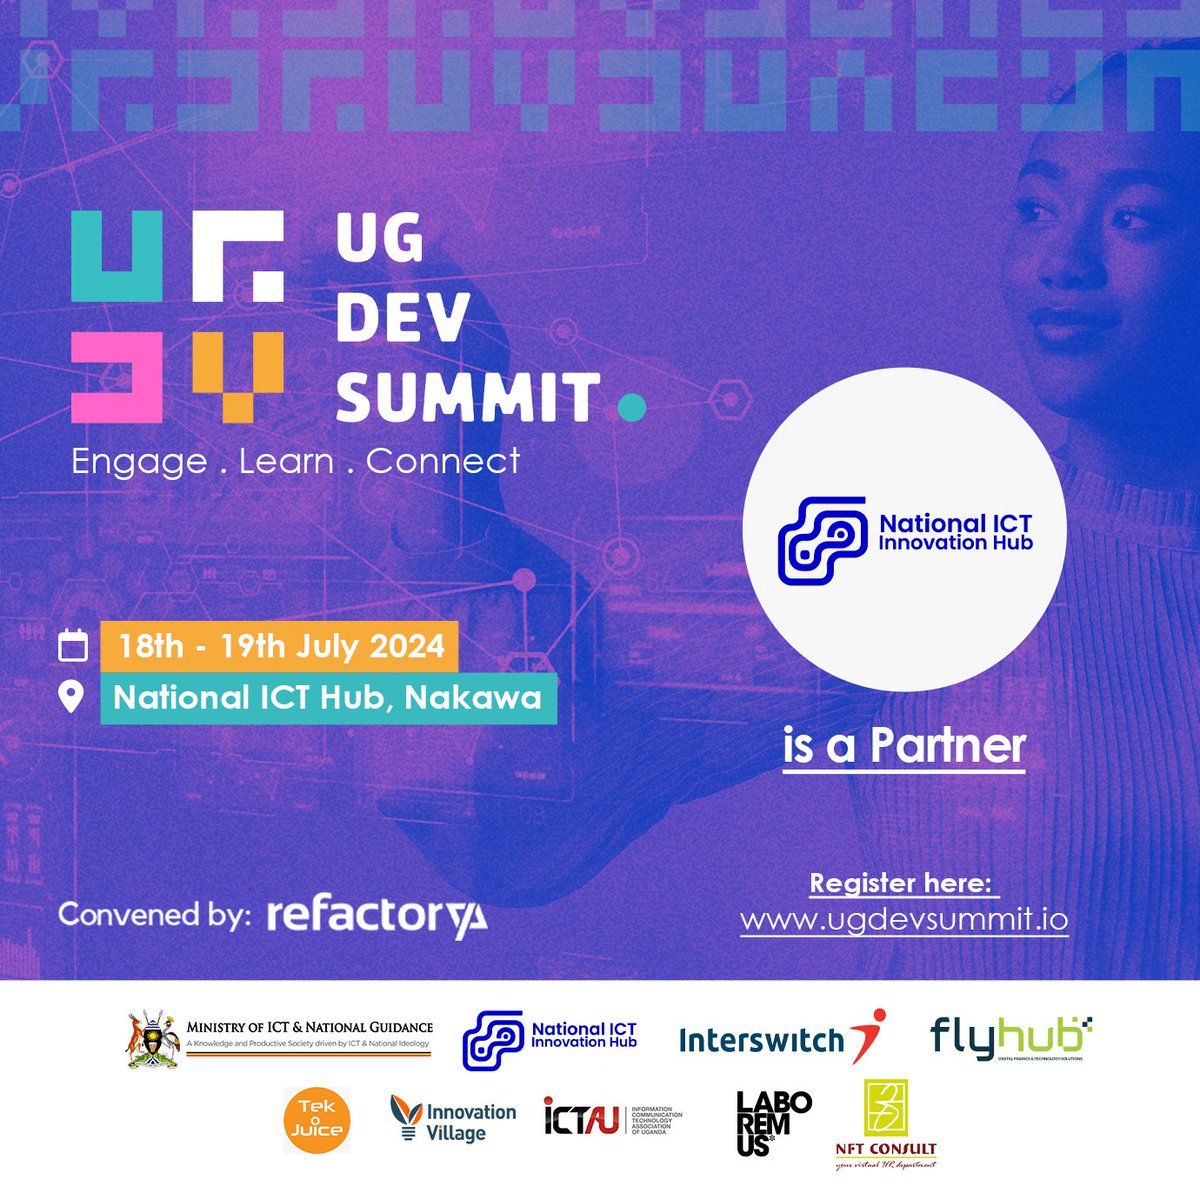 Proud to be a part of #UgDevSummit hosted by @refactoryug! We're fostering a culture of engaging, learning & connecting within 🇺🇬's tech ecosystem. Excited to inspire, learn, & create opportunities shaping 🇺🇬's digital transformation & economy! Register: ugdevsummit.io